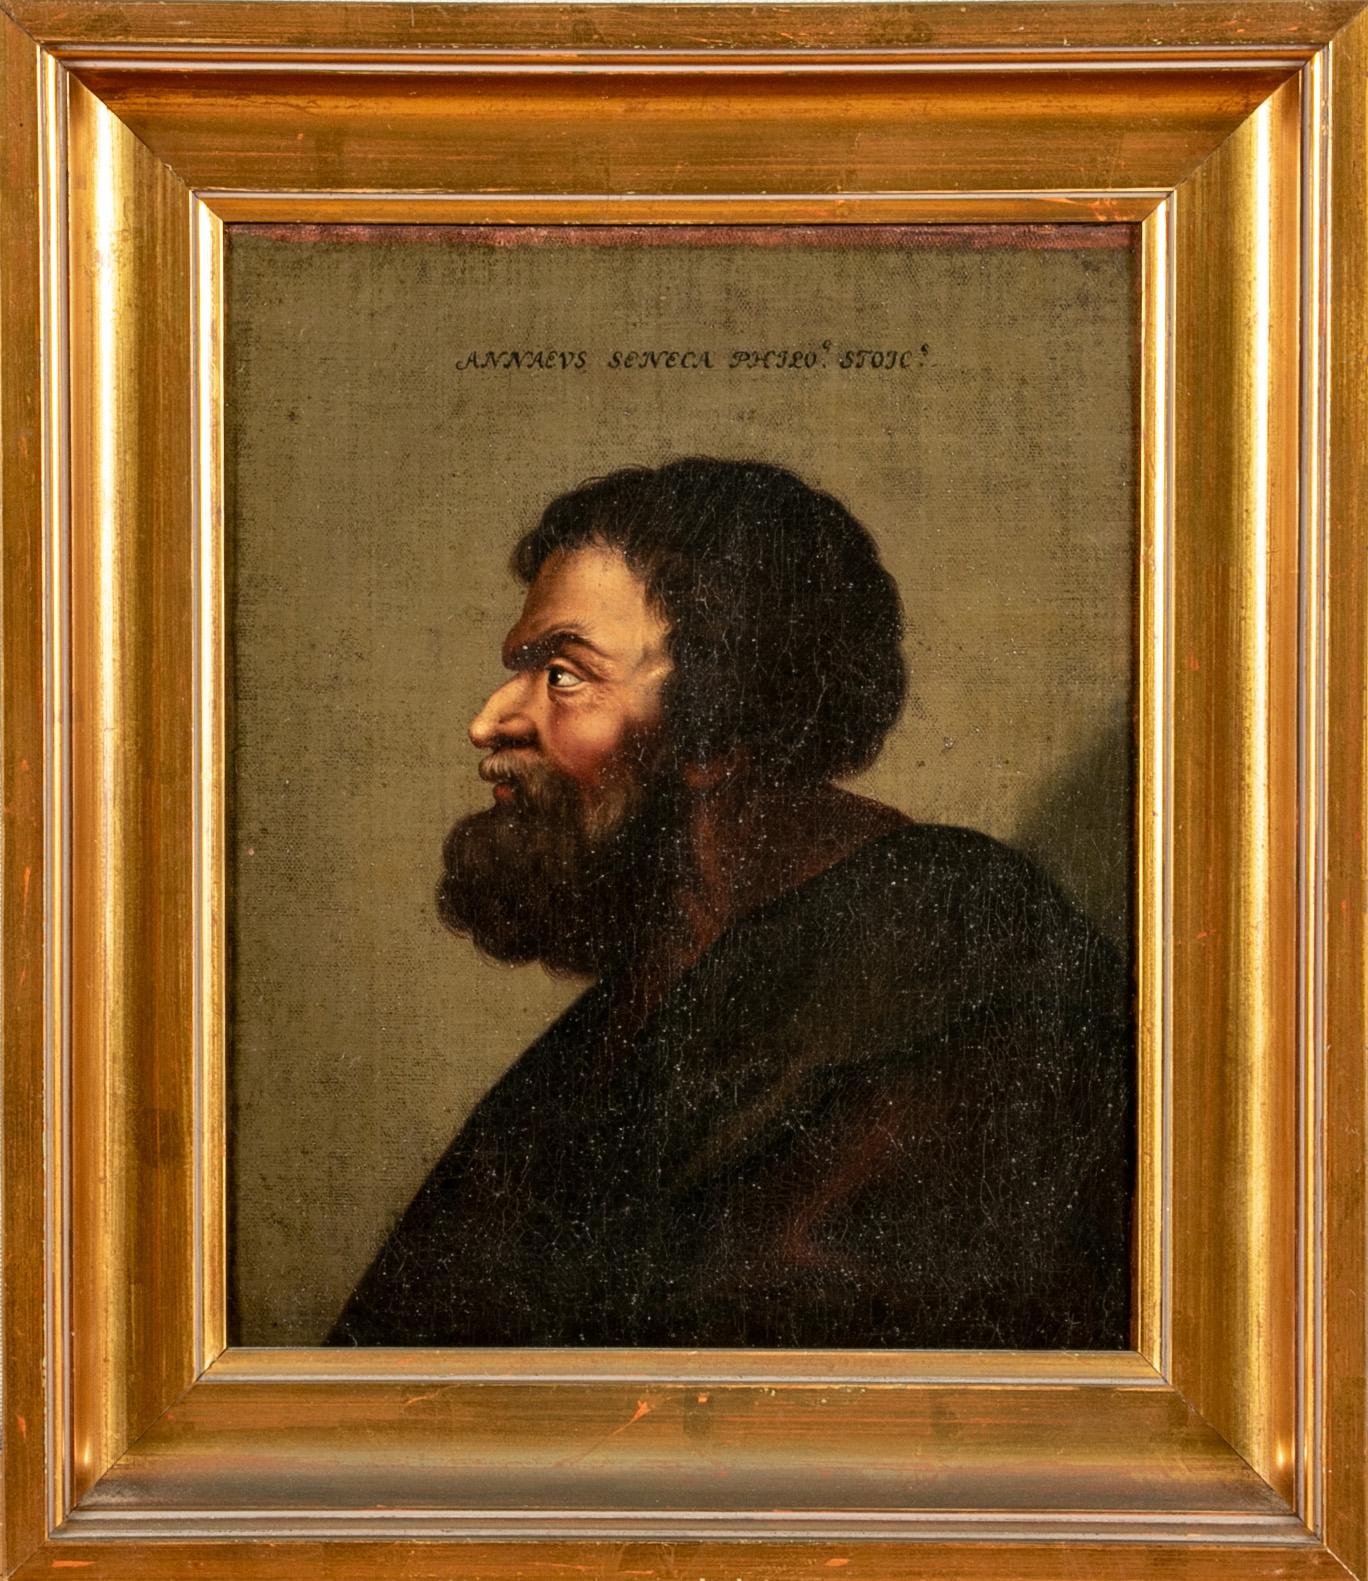 Series of 12 antique portraits of historical figures, circa 17th-18th century, oils on canvas, mainly Greek and Roman figures each identified above, including: Socrates, Aristotle, Solon, Heraclitus, Tales, Empedocles Philosofus, Pythagoras, Doctor